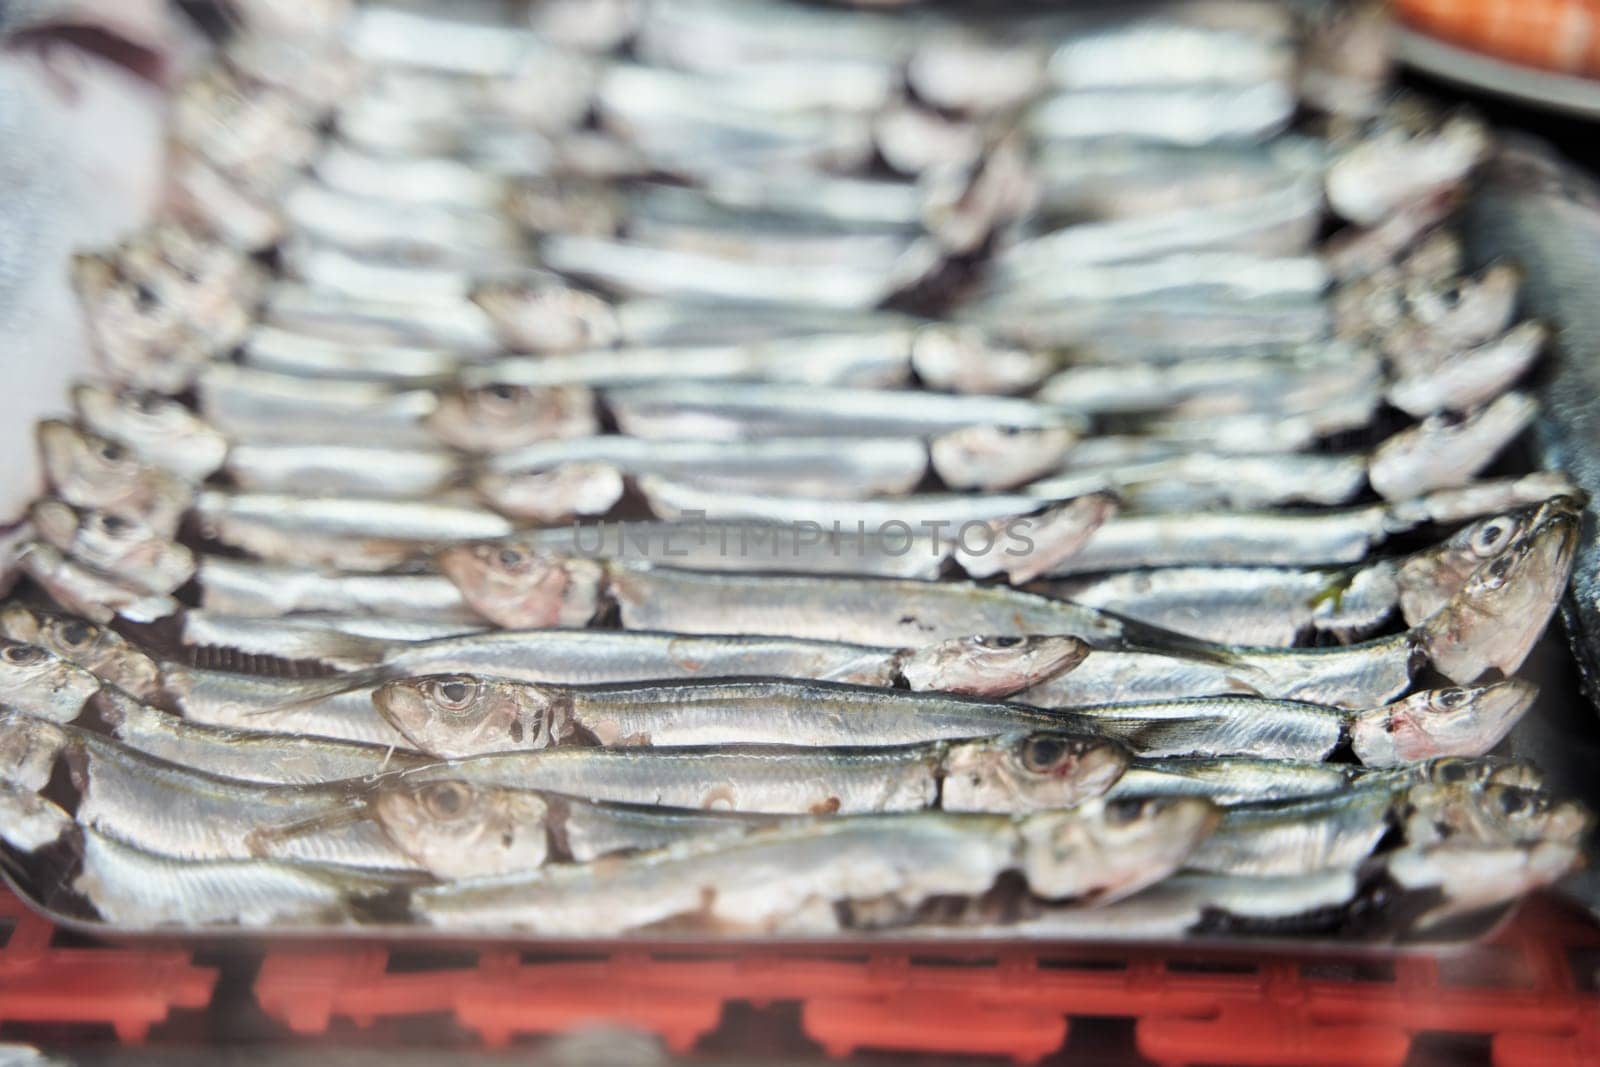 A stack of oily fish is perched on wood and ice. The natural material contrasts with the shiny metal of their fashion accessory scales. The fish are animal products commonly used as staple food